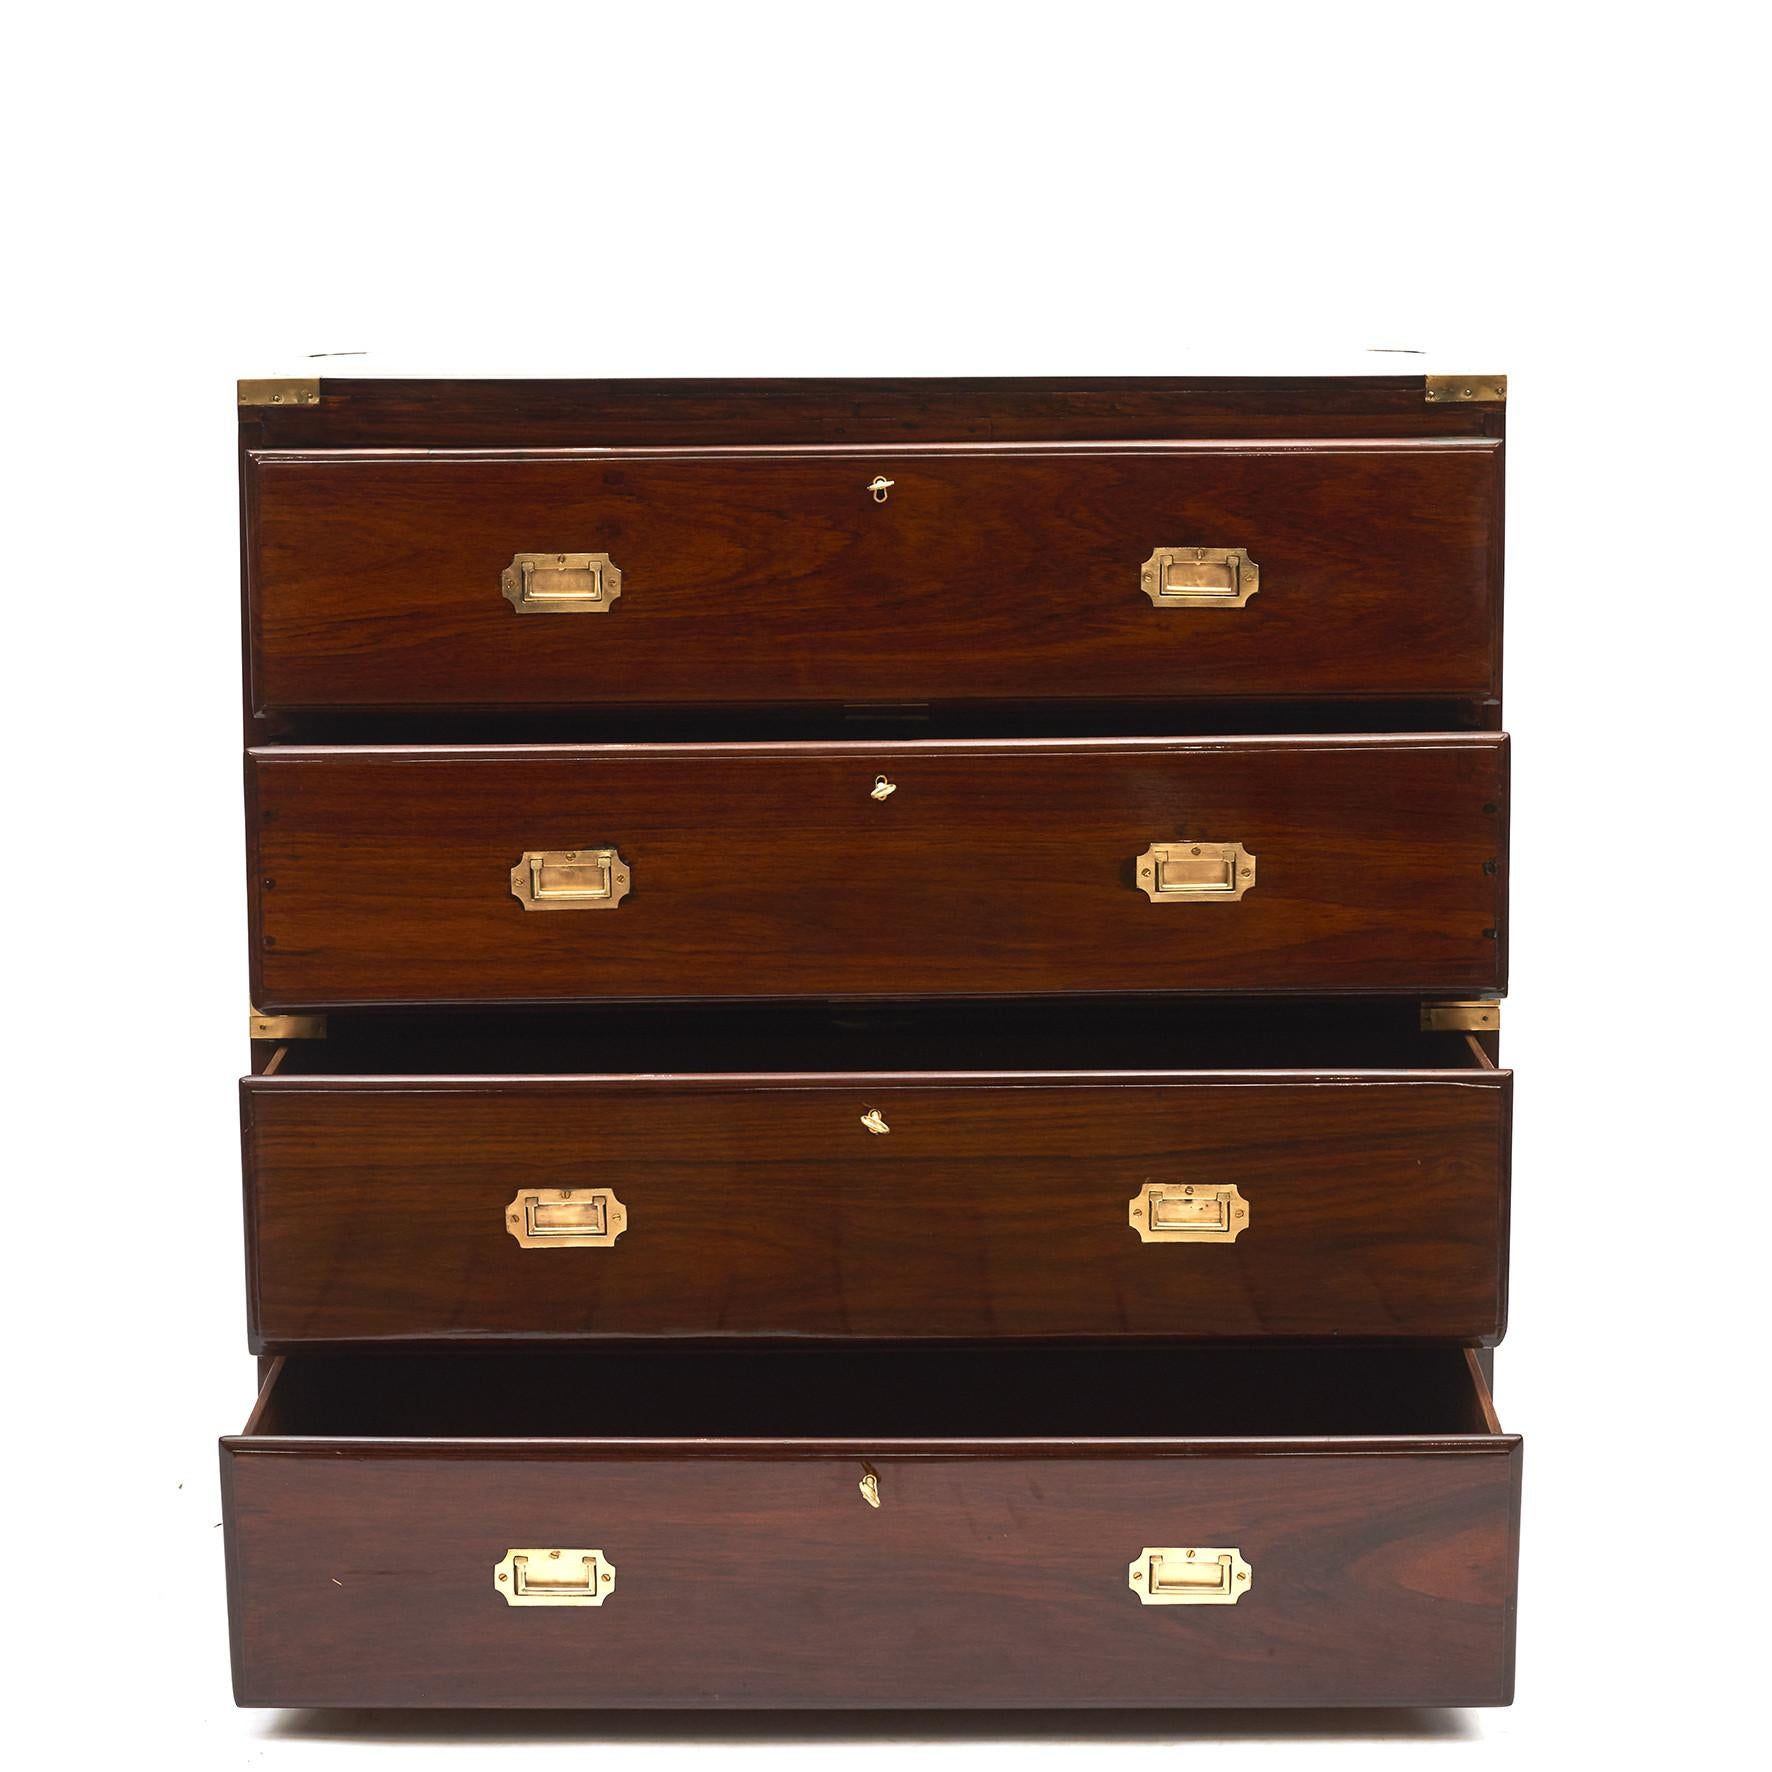 English military campaign chest of drawers in solid Padauk wood with a beautiful grain. Original brass fittings. In two parts.
England, 1860-1880.

Campaign era chests were the travel items of British military officers who bought and commissioned